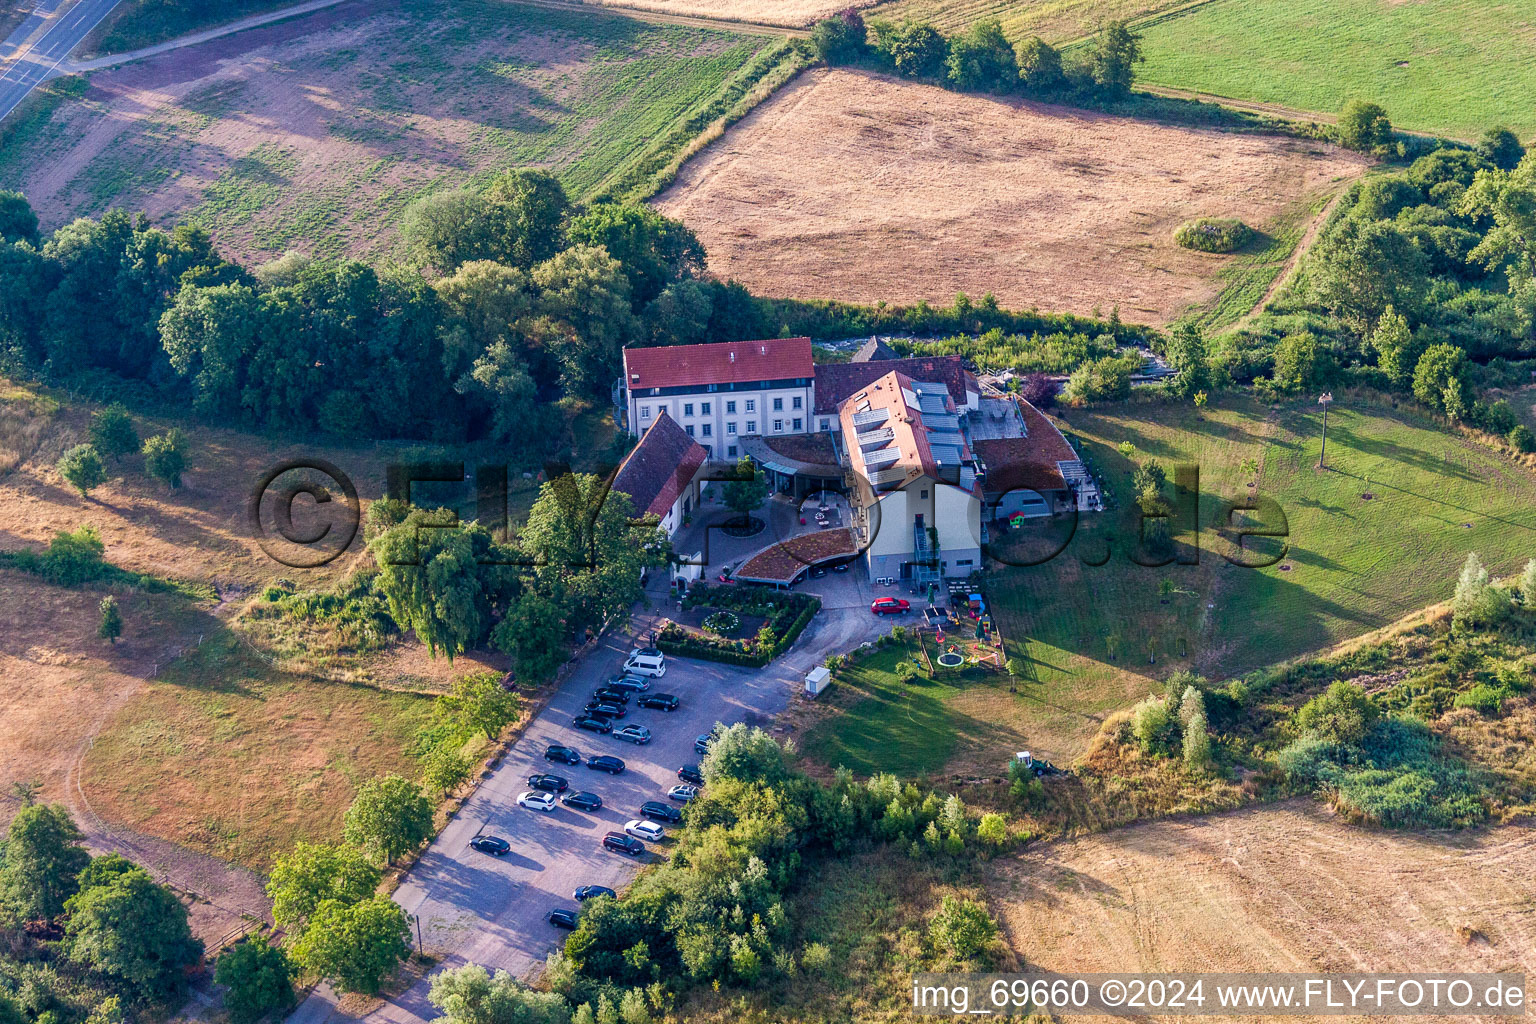 Complex of the hotel building Zeiskamer Muehle in Zeiskam in the state Rhineland-Palatinate, Germany out of the air